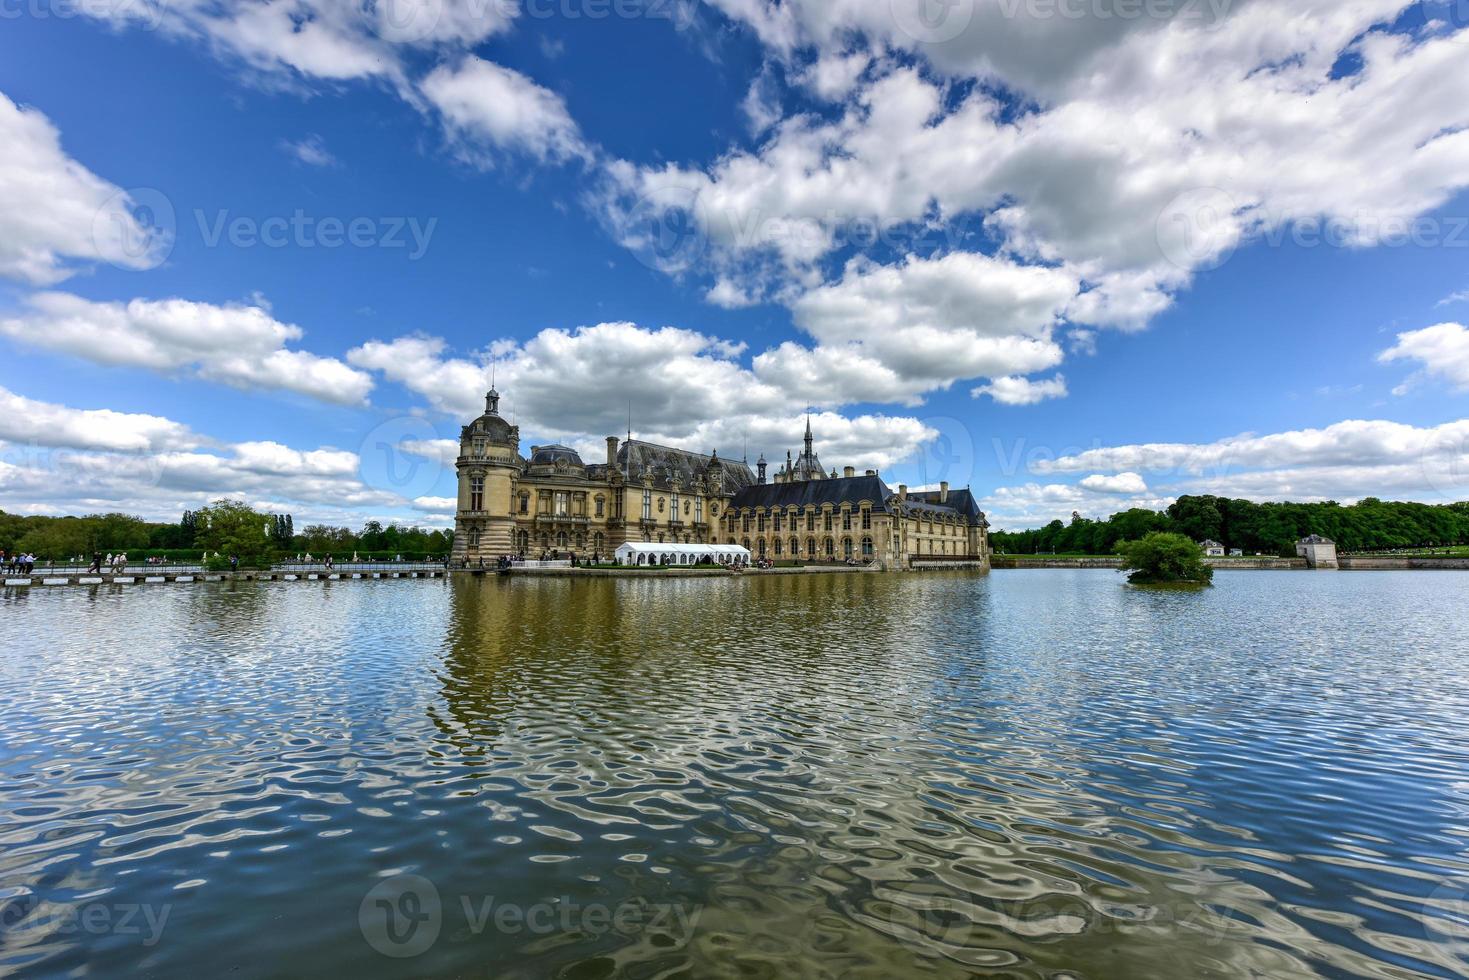 Chateau de Chantilly, historic chateau located in the town of Chantilly, France. photo